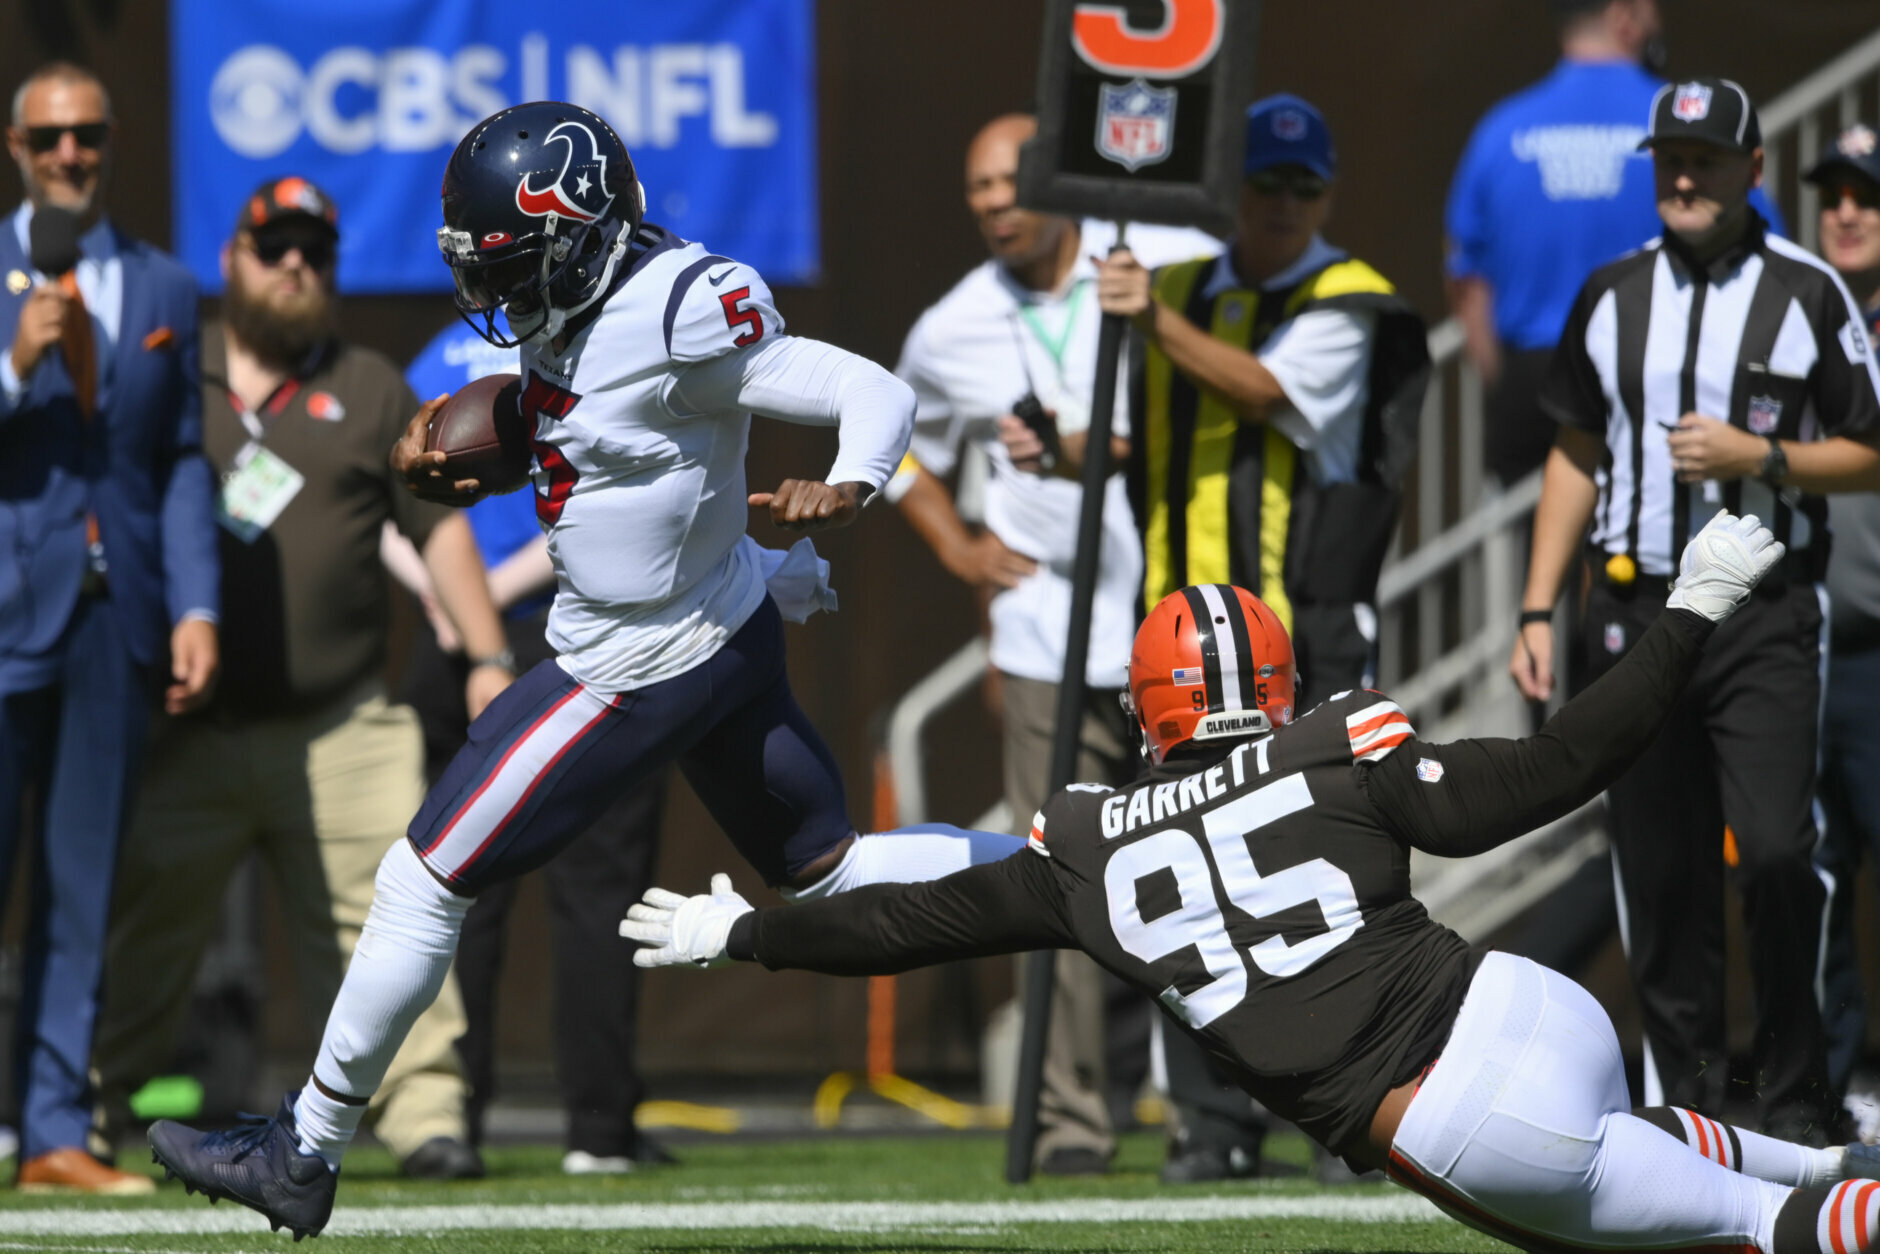 <p><em><strong>Texans 21</strong></em><br />
<em><strong>Browns 31</strong></em></p>
<p>This should be both scary for Cleveland and encouraging for Houston: If Tyrod Taylor finishes this game, the Texans probably win. As usual, Taylor is better than people think he is and Houston will miss him badly if he&#8217;s sidelined for an extended period.</p>
